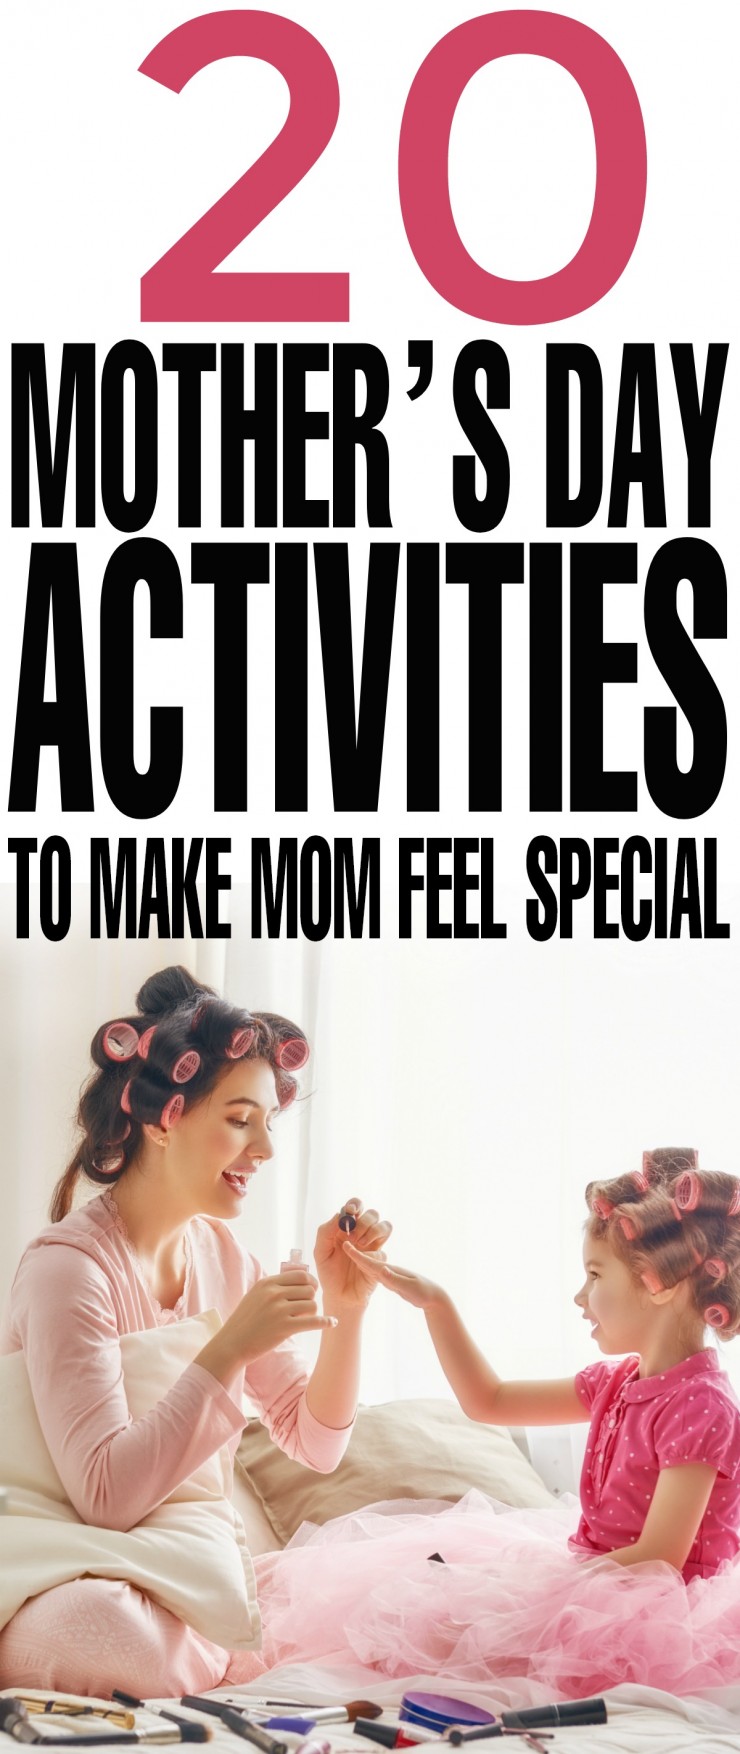 20 Mother’s Day Activities to Make Mom Feel Special